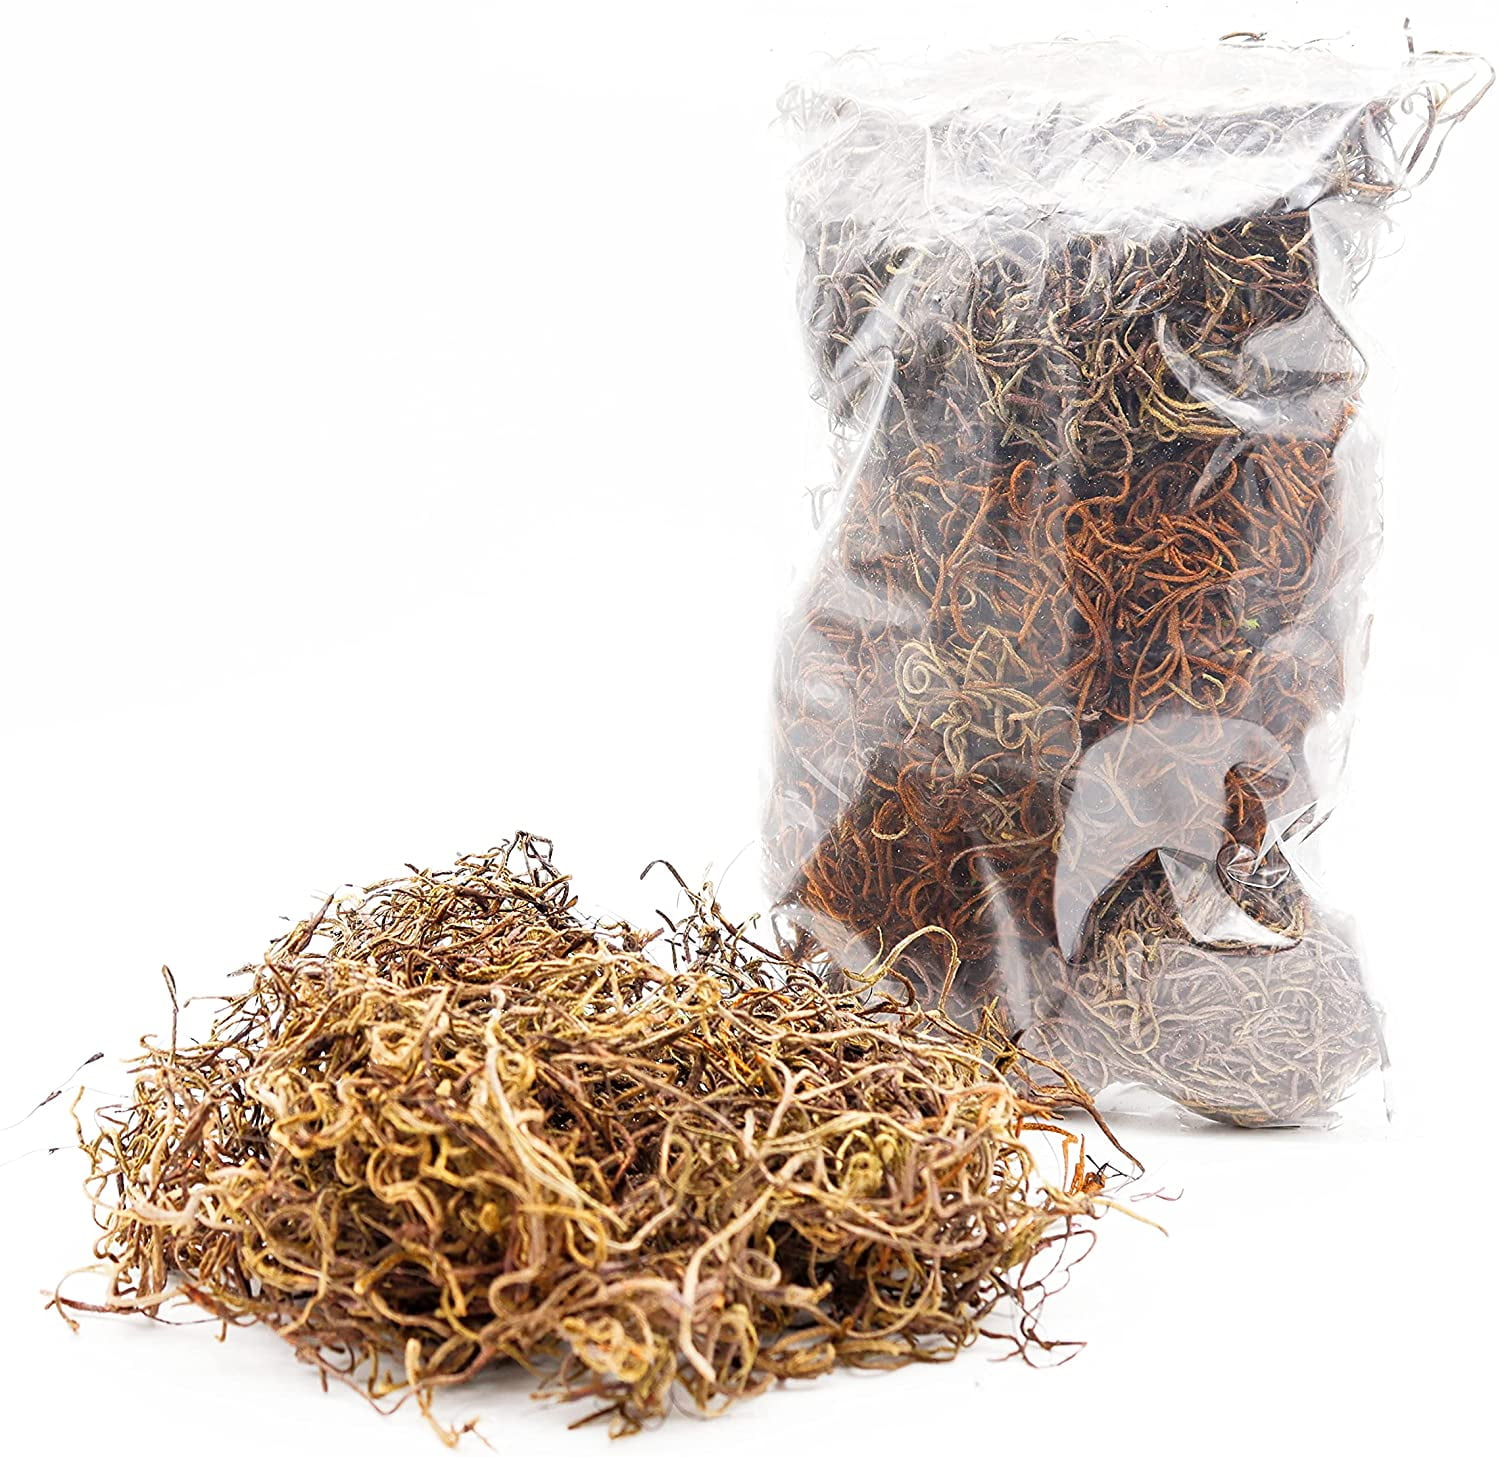 NW Wholesaler, 1 LB bag of Light Green Spanish Moss For Floral Design,  Terrariums, Fairy Gardens, Arts and Crafts